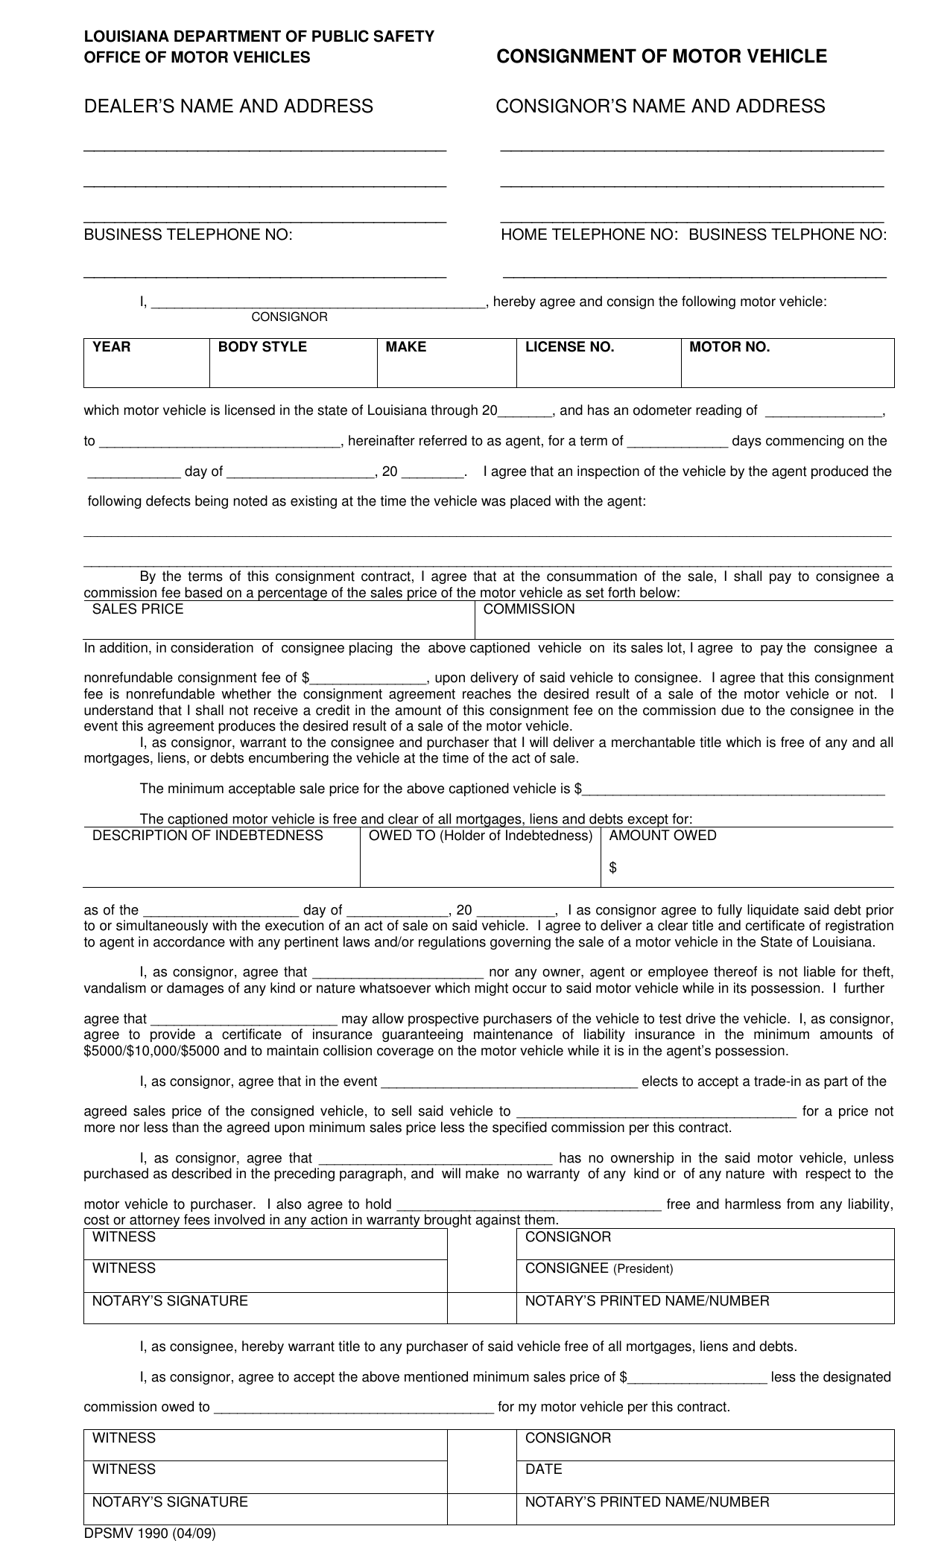 Form DPSMV1990 Consignment of Motor Vehicle - Louisiana, Page 1